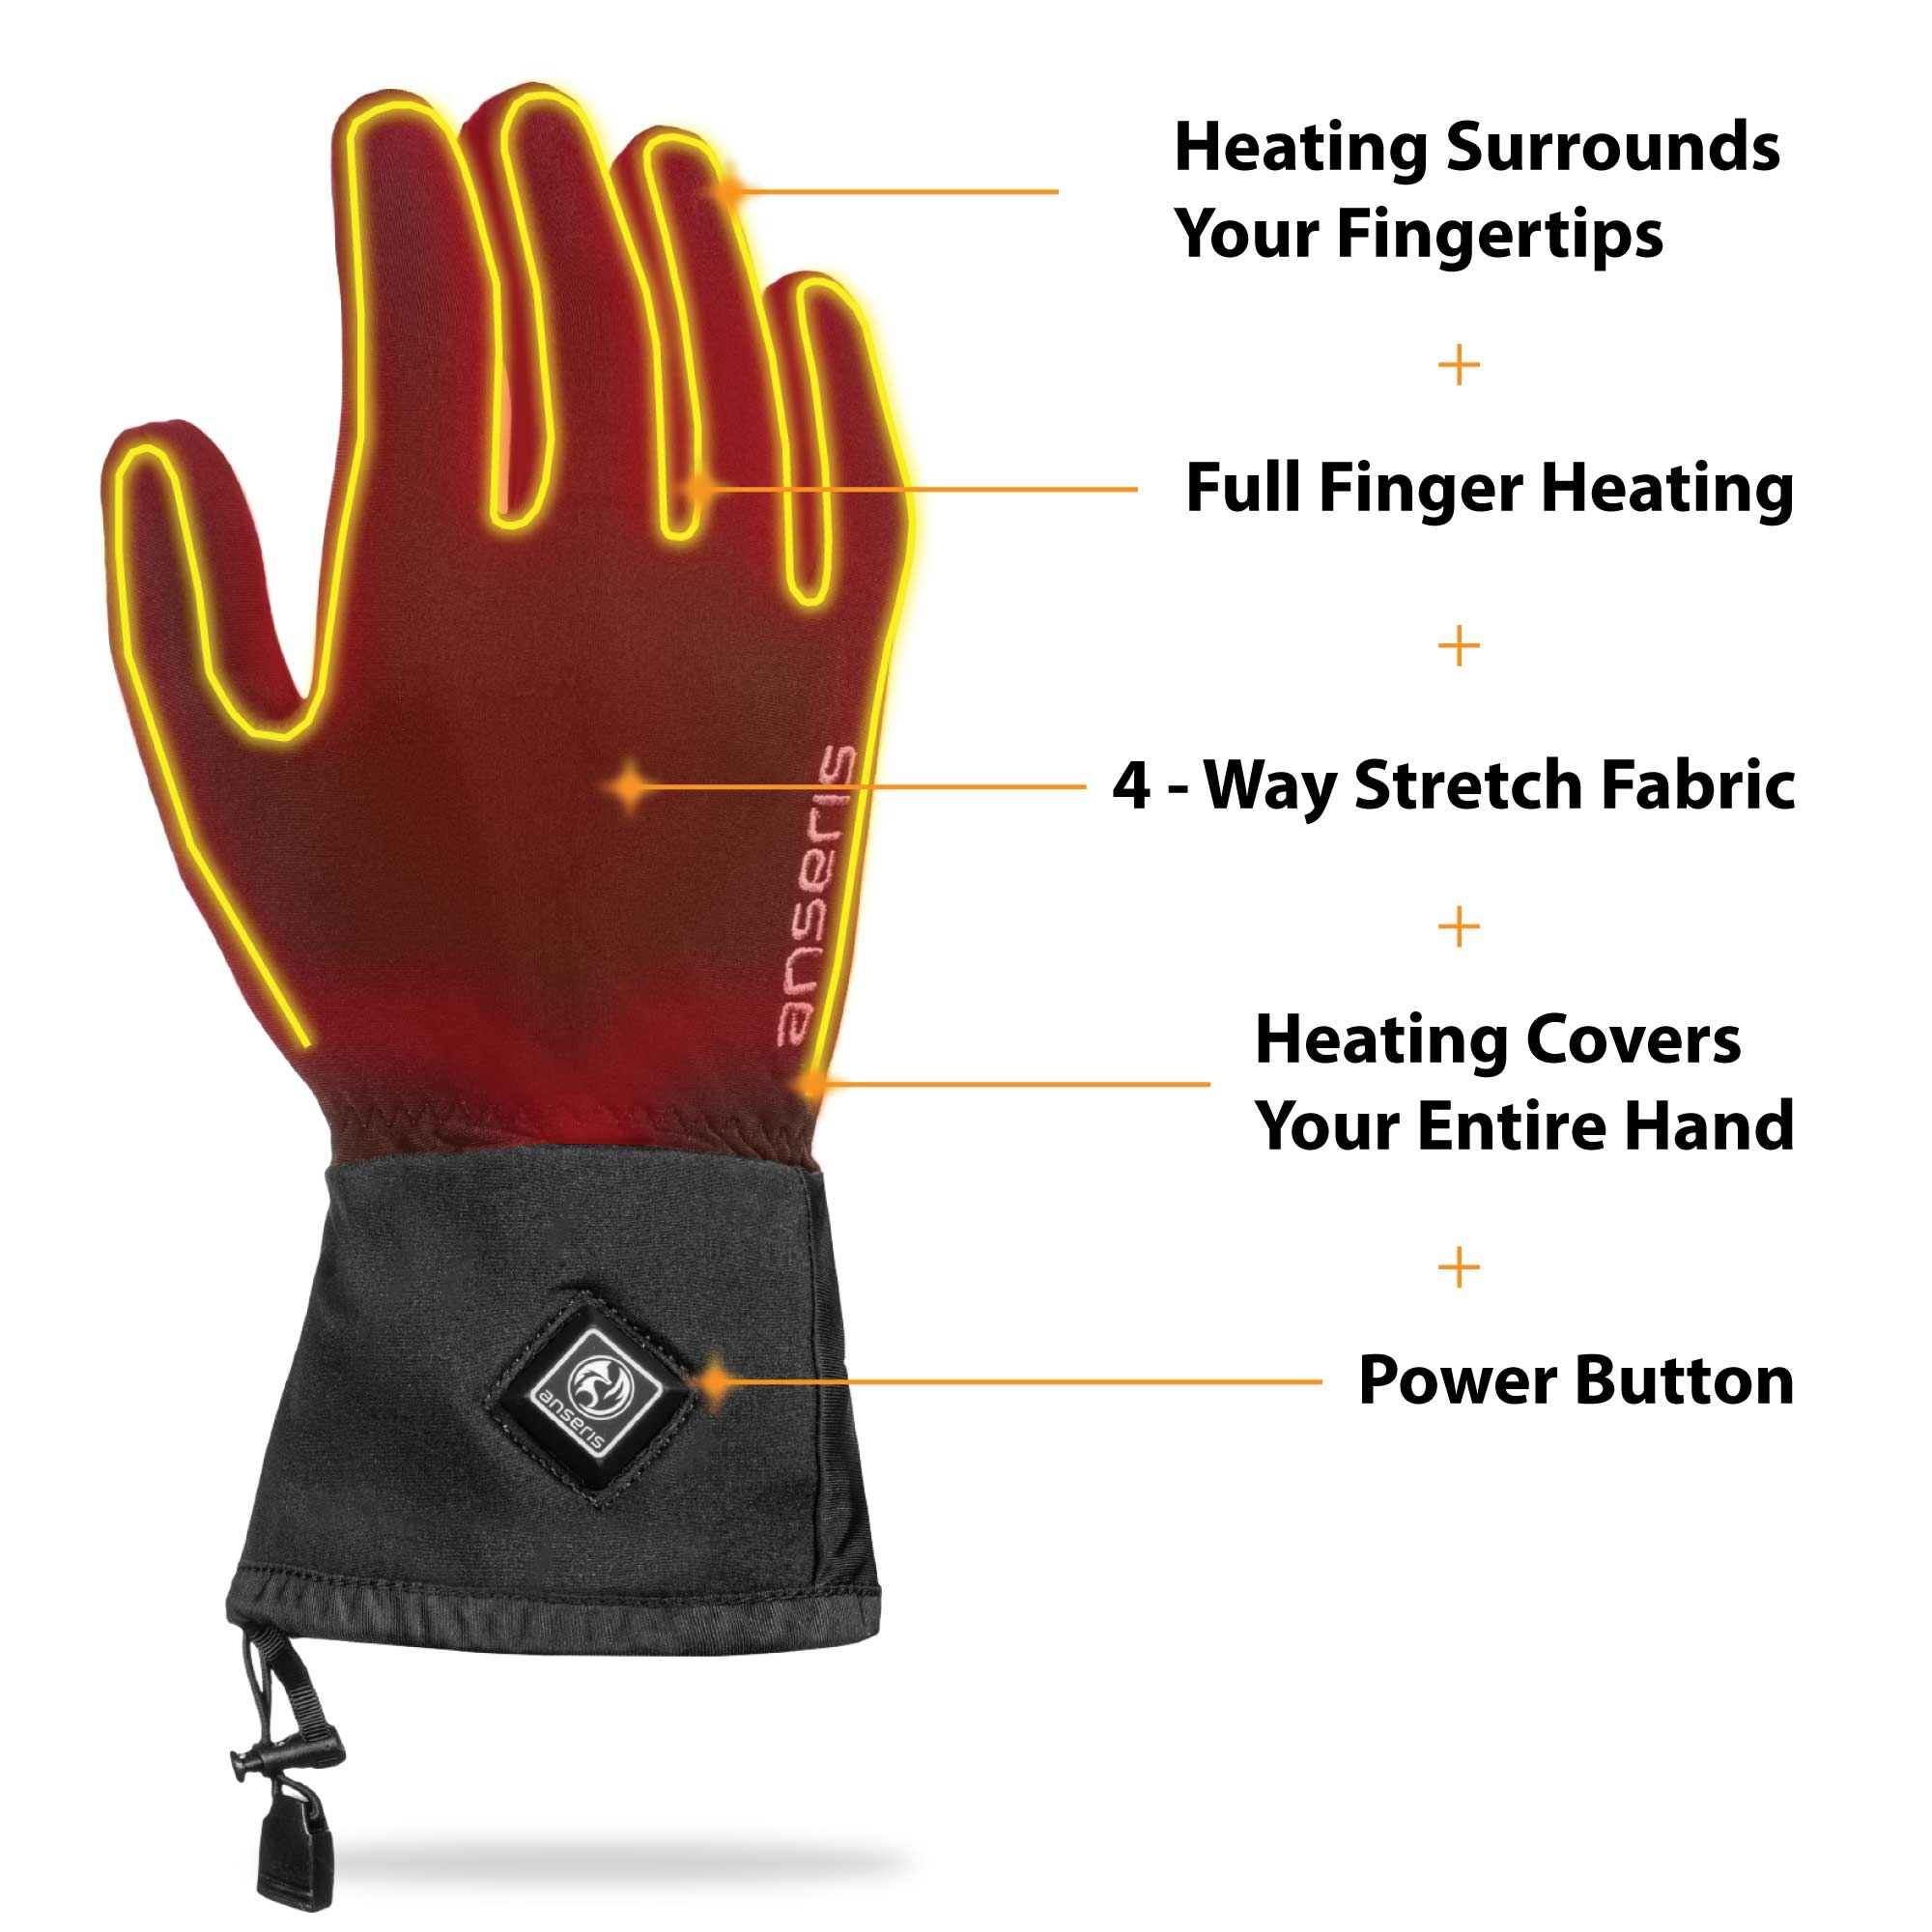 HEATED GLOVE LINER Rechargeable, Battery Powered Electric Hand Warmer.